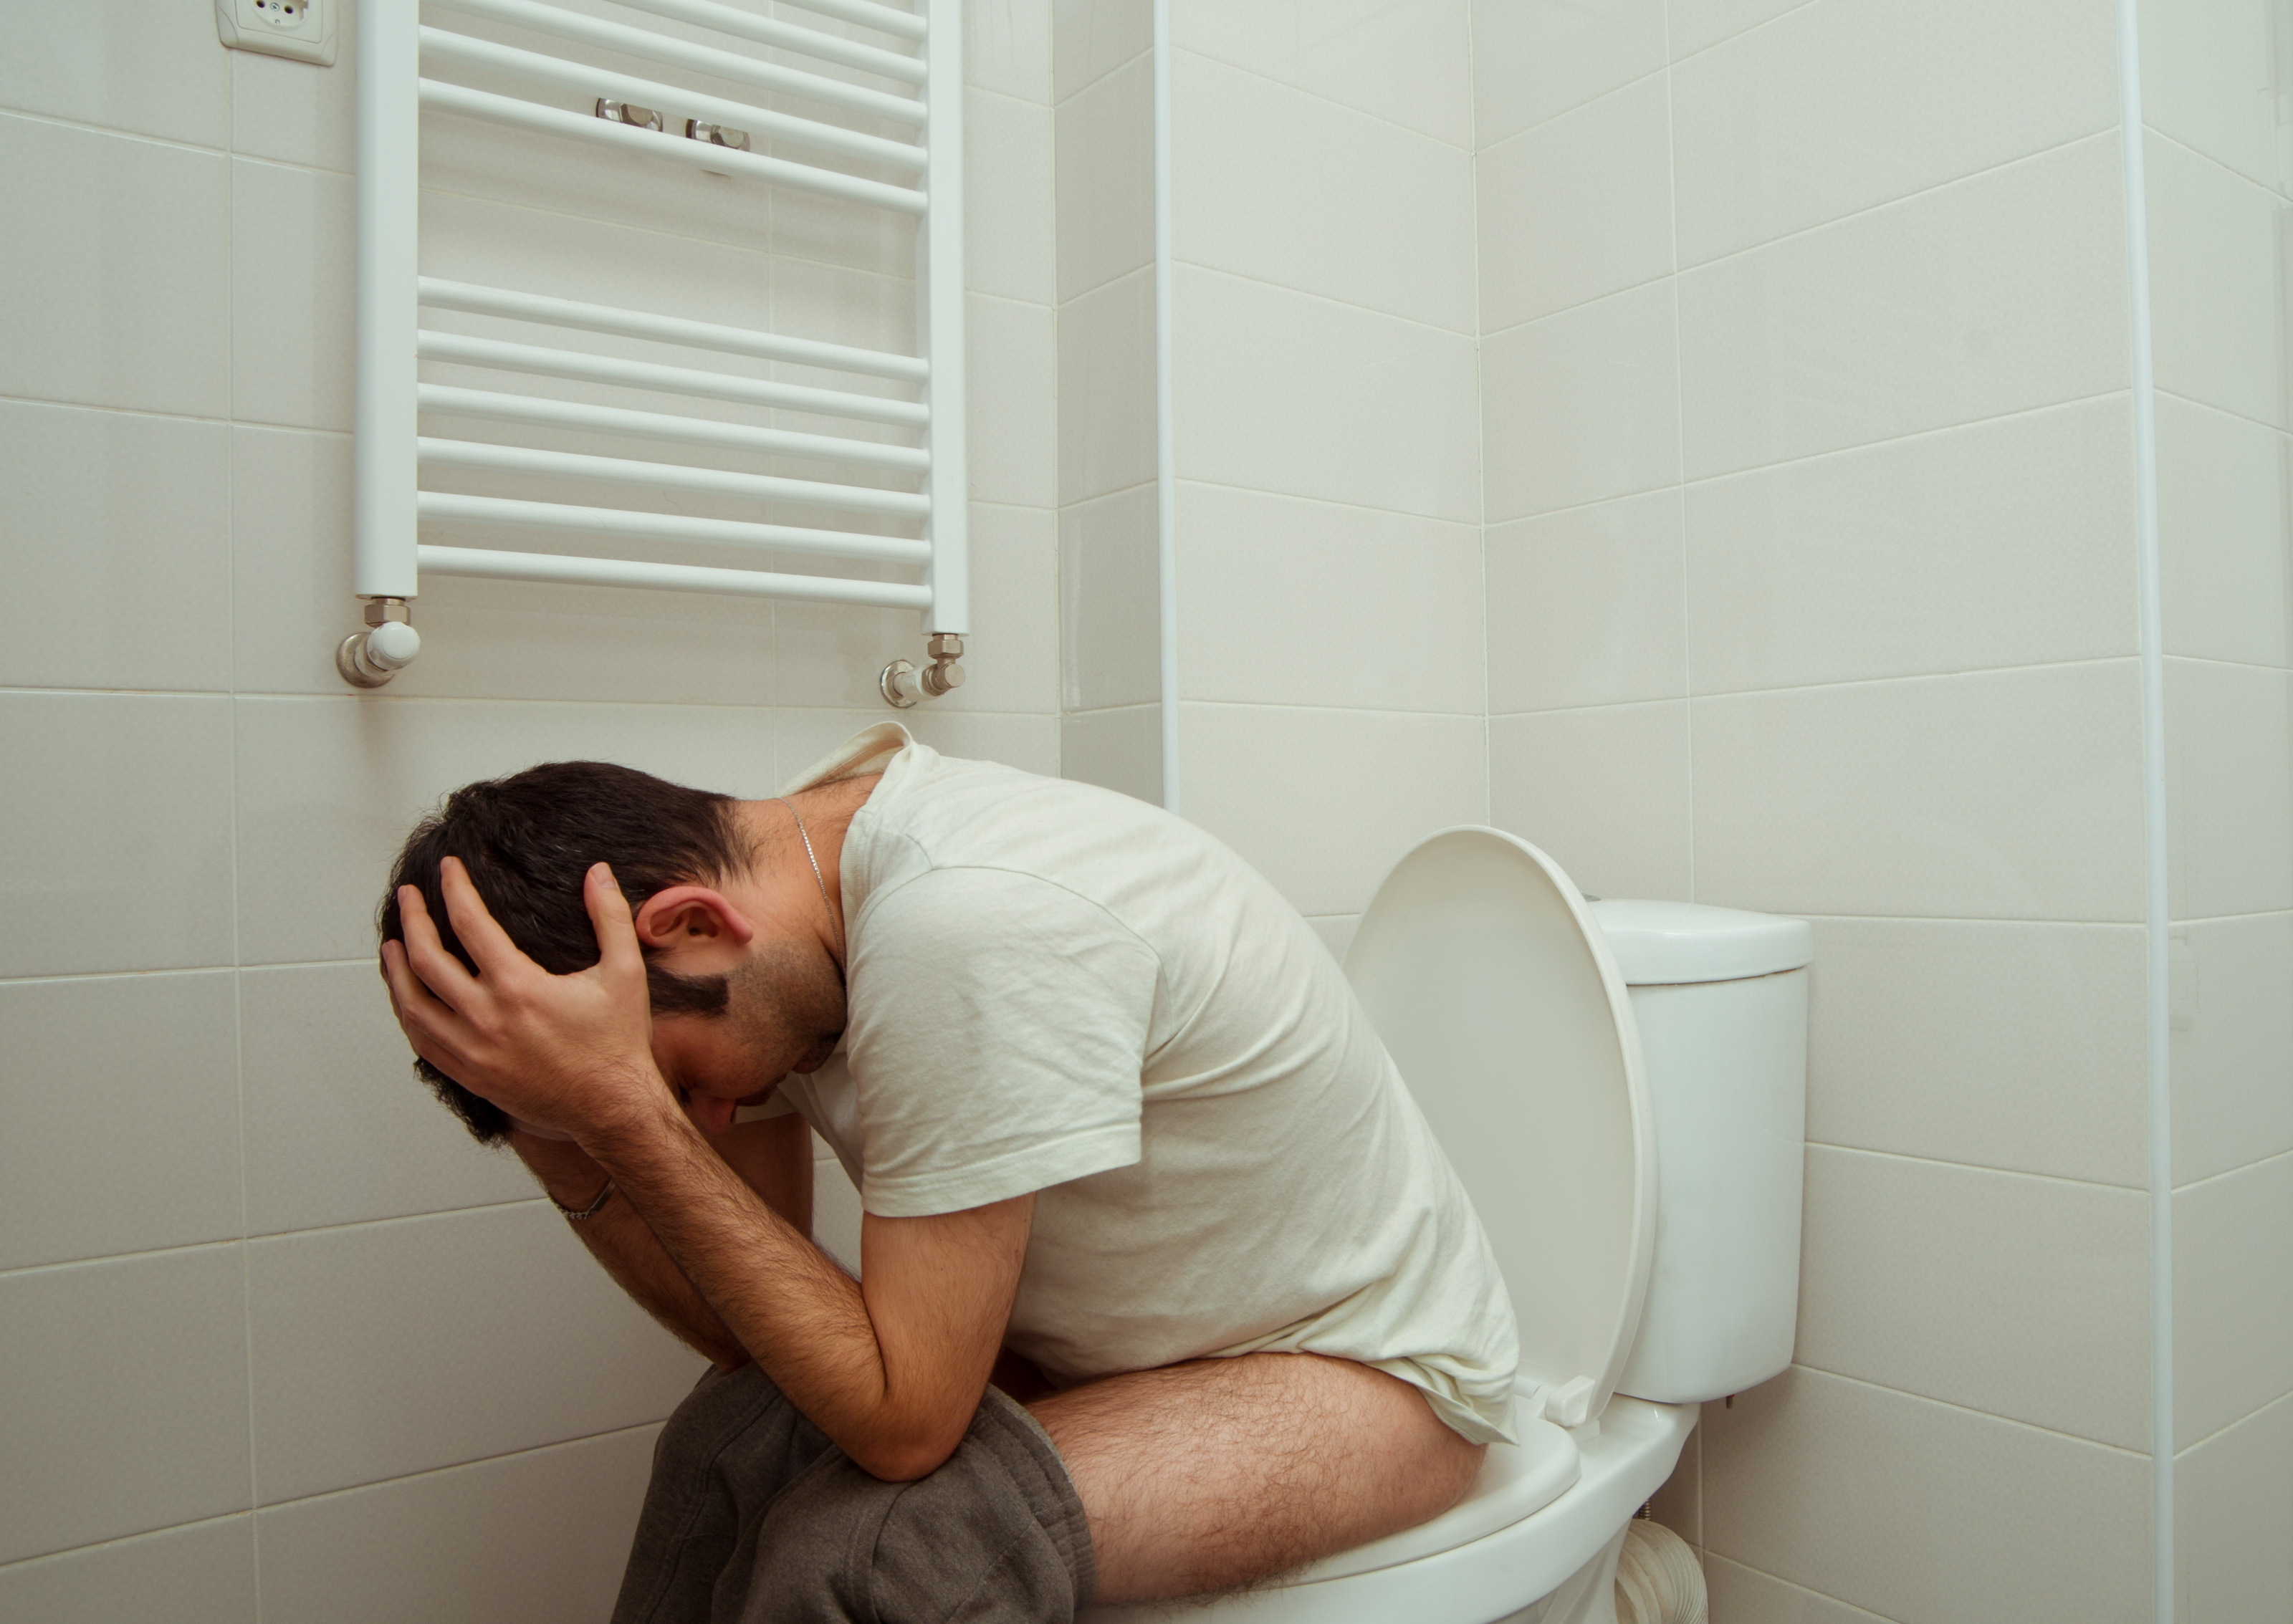 5 Things to Know About Haemorrhoids and